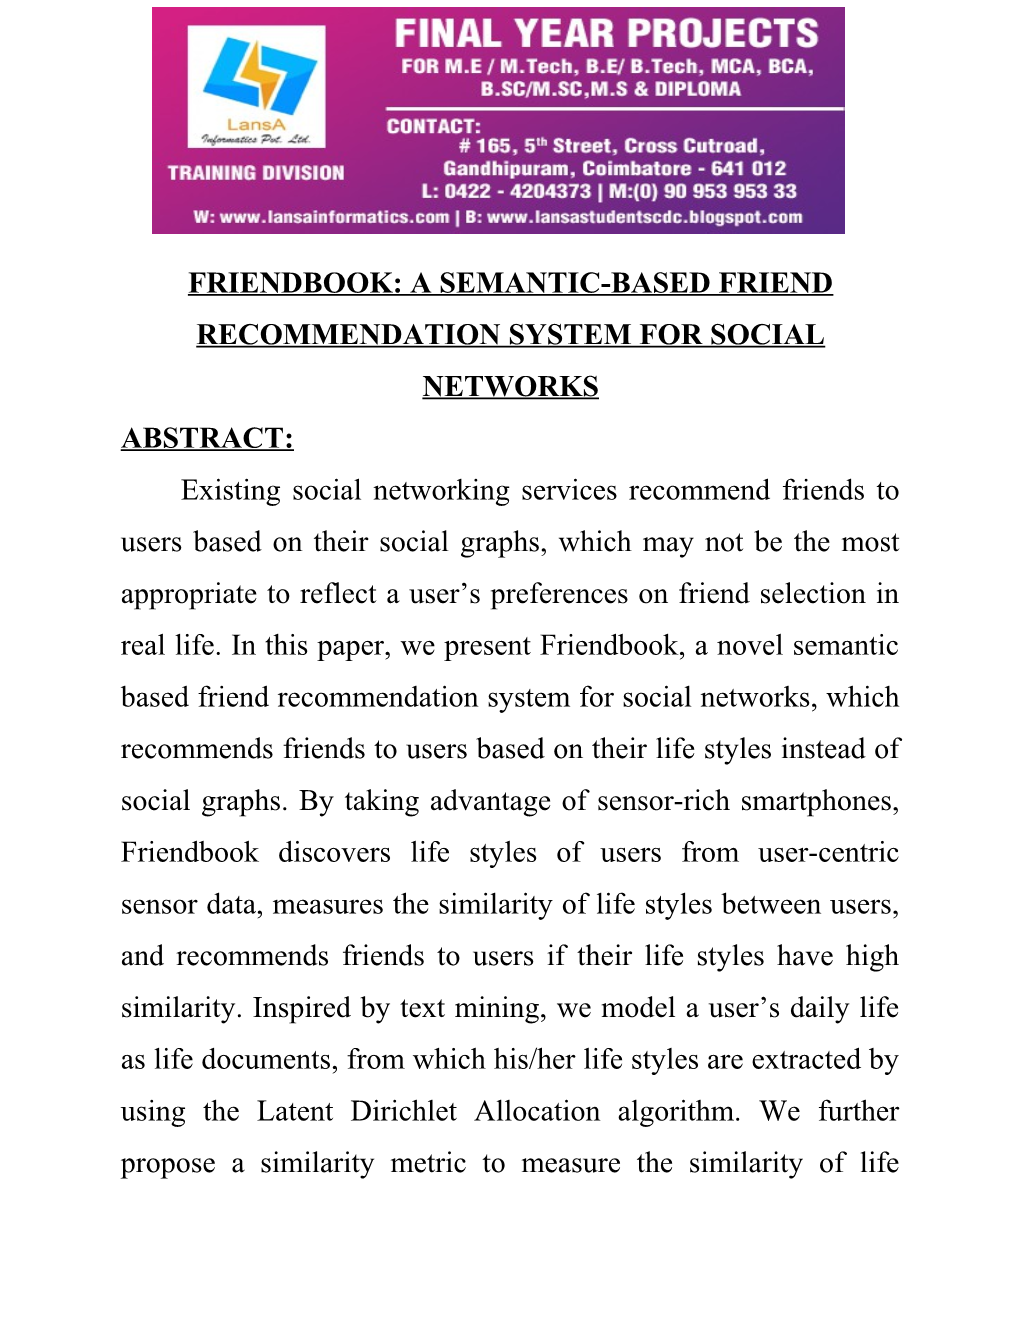 Friendbook: a Semantic-Based Friend Recommendation System for Social Networks